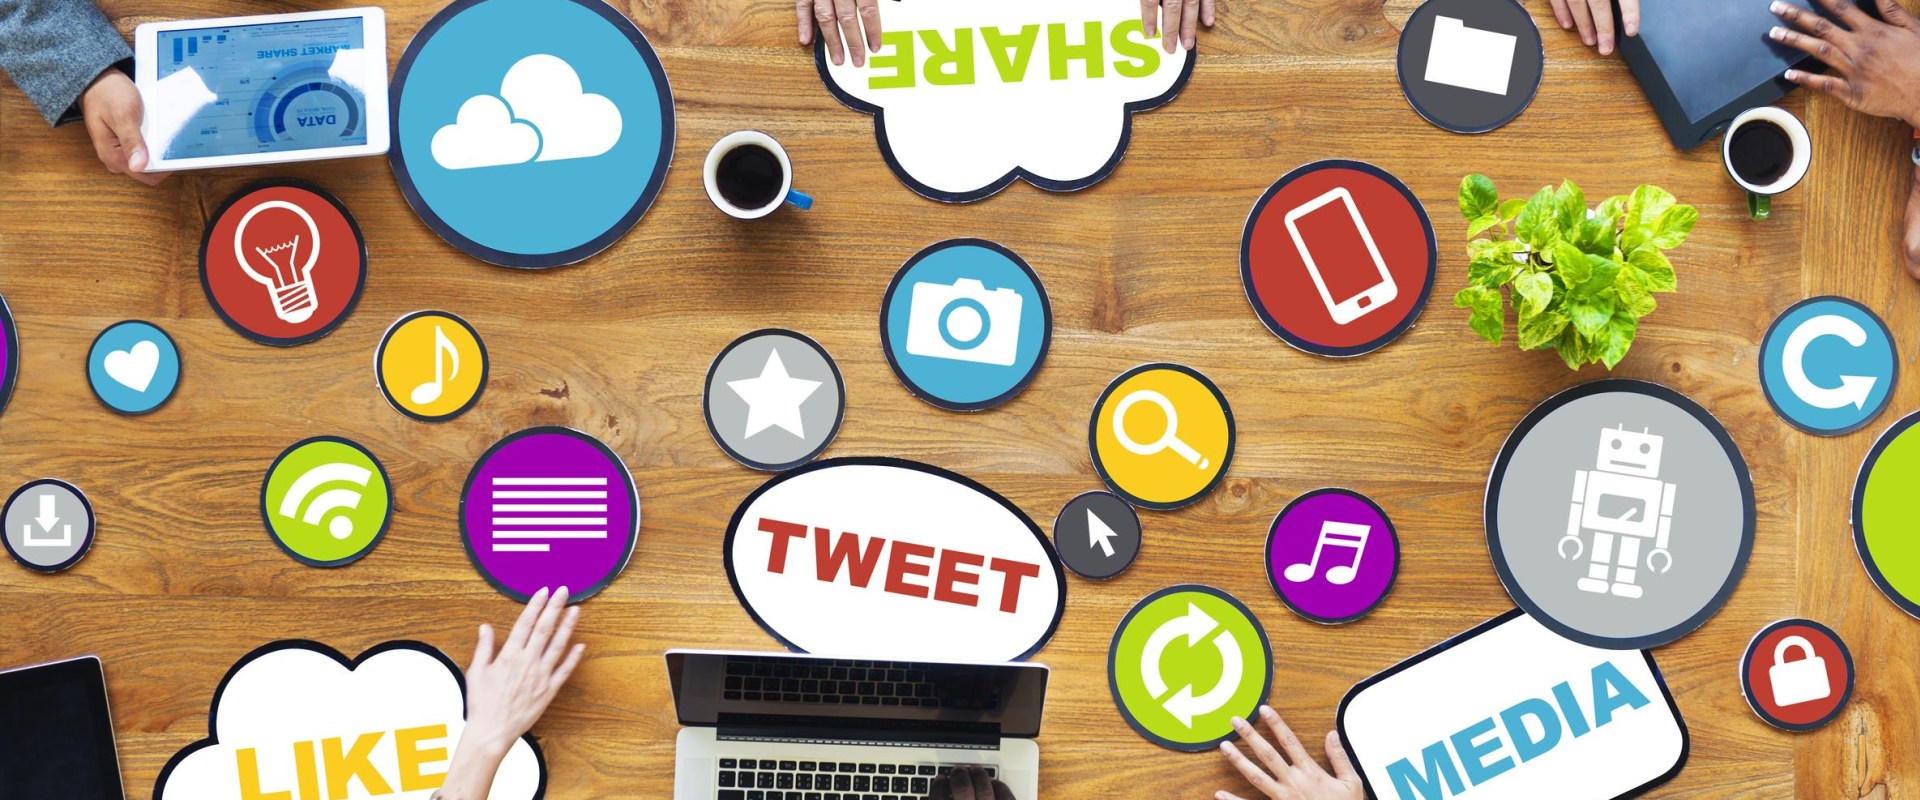 5 Social Media Tips To You Help Kick Start Your Online Presence